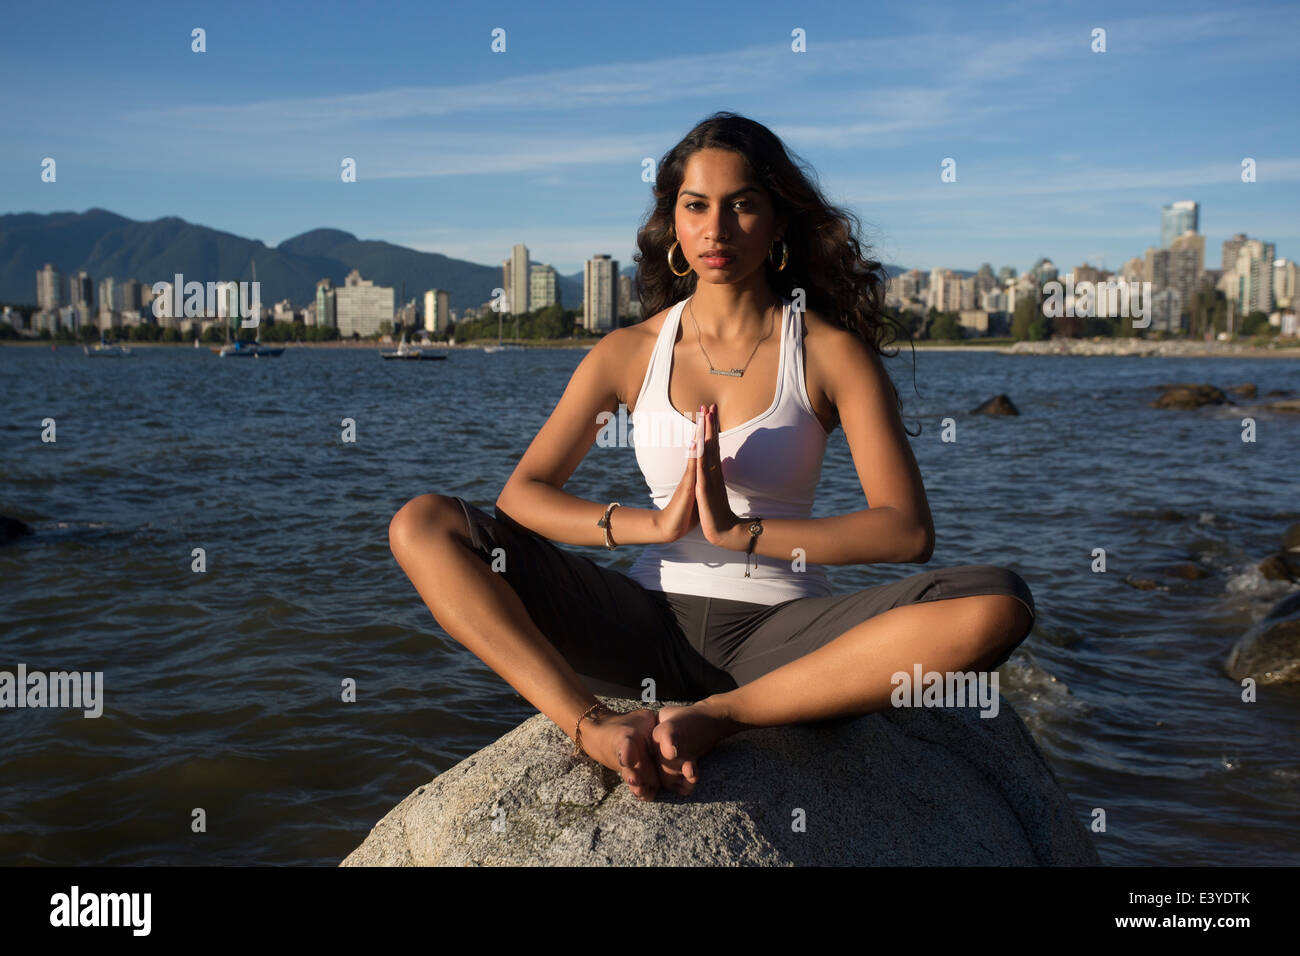 A young Indian woman is meditating on a rock with the ocean and downtown Vancouver in the distant background. Stock Photo